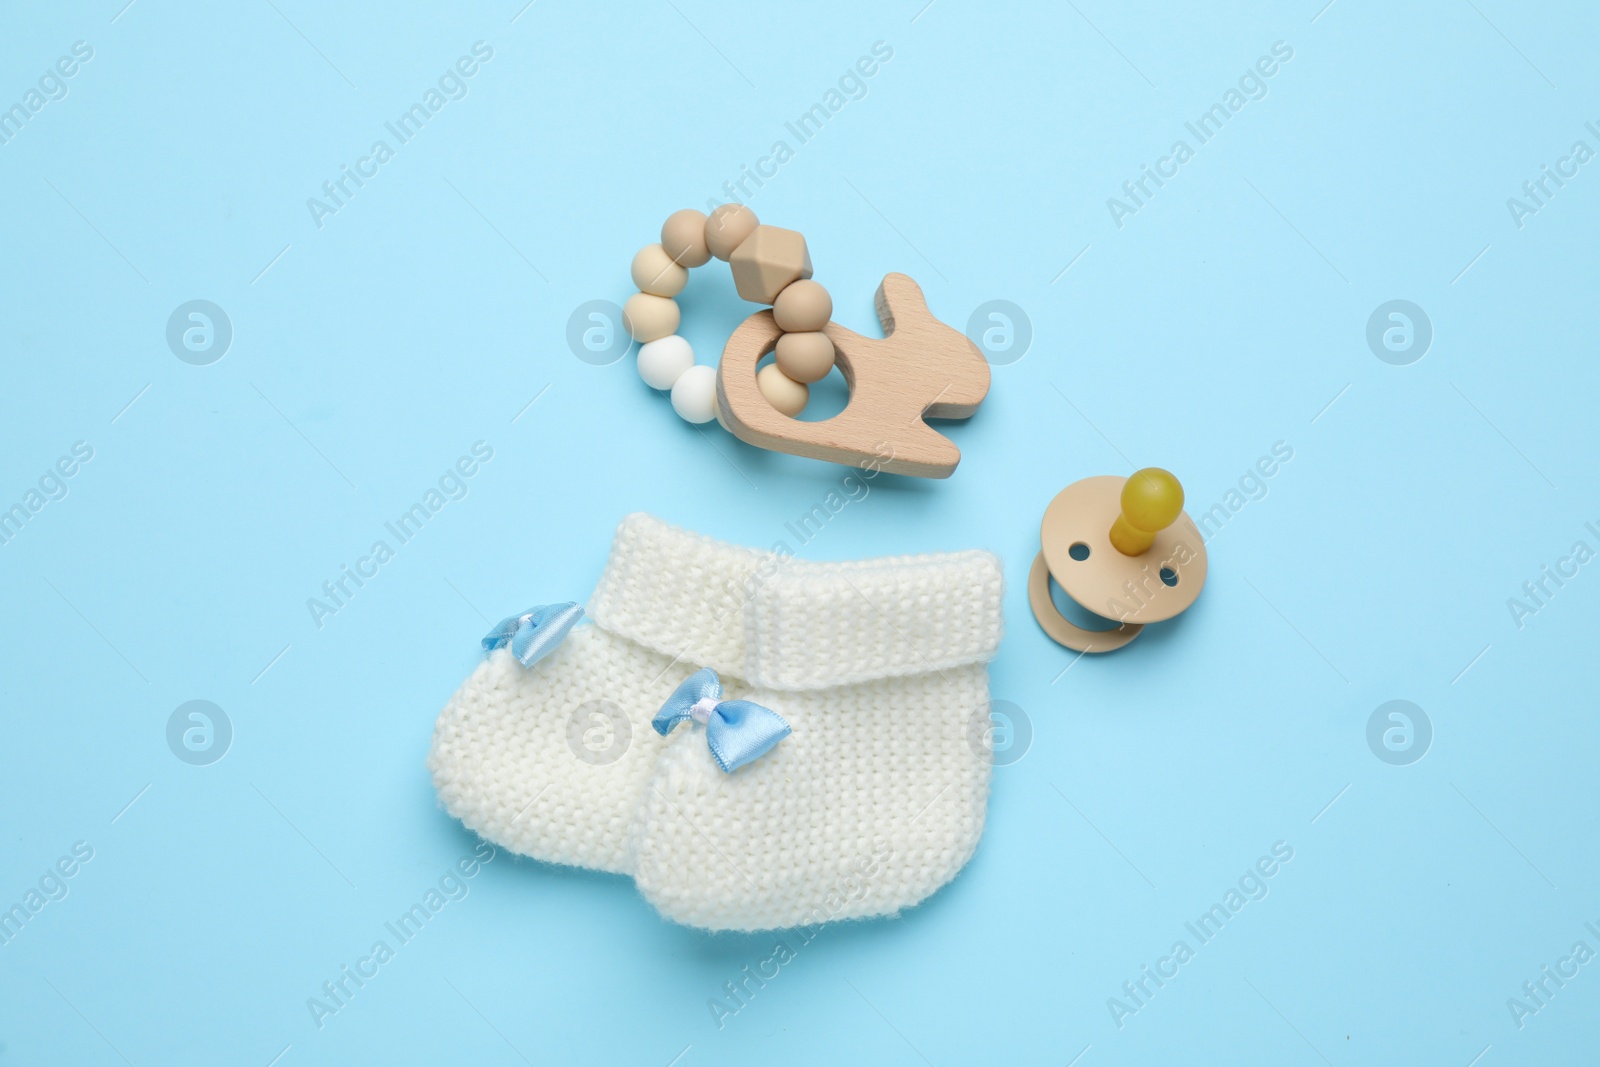 Photo of Knitted baby booties and accessories on turquoise background, flat lay